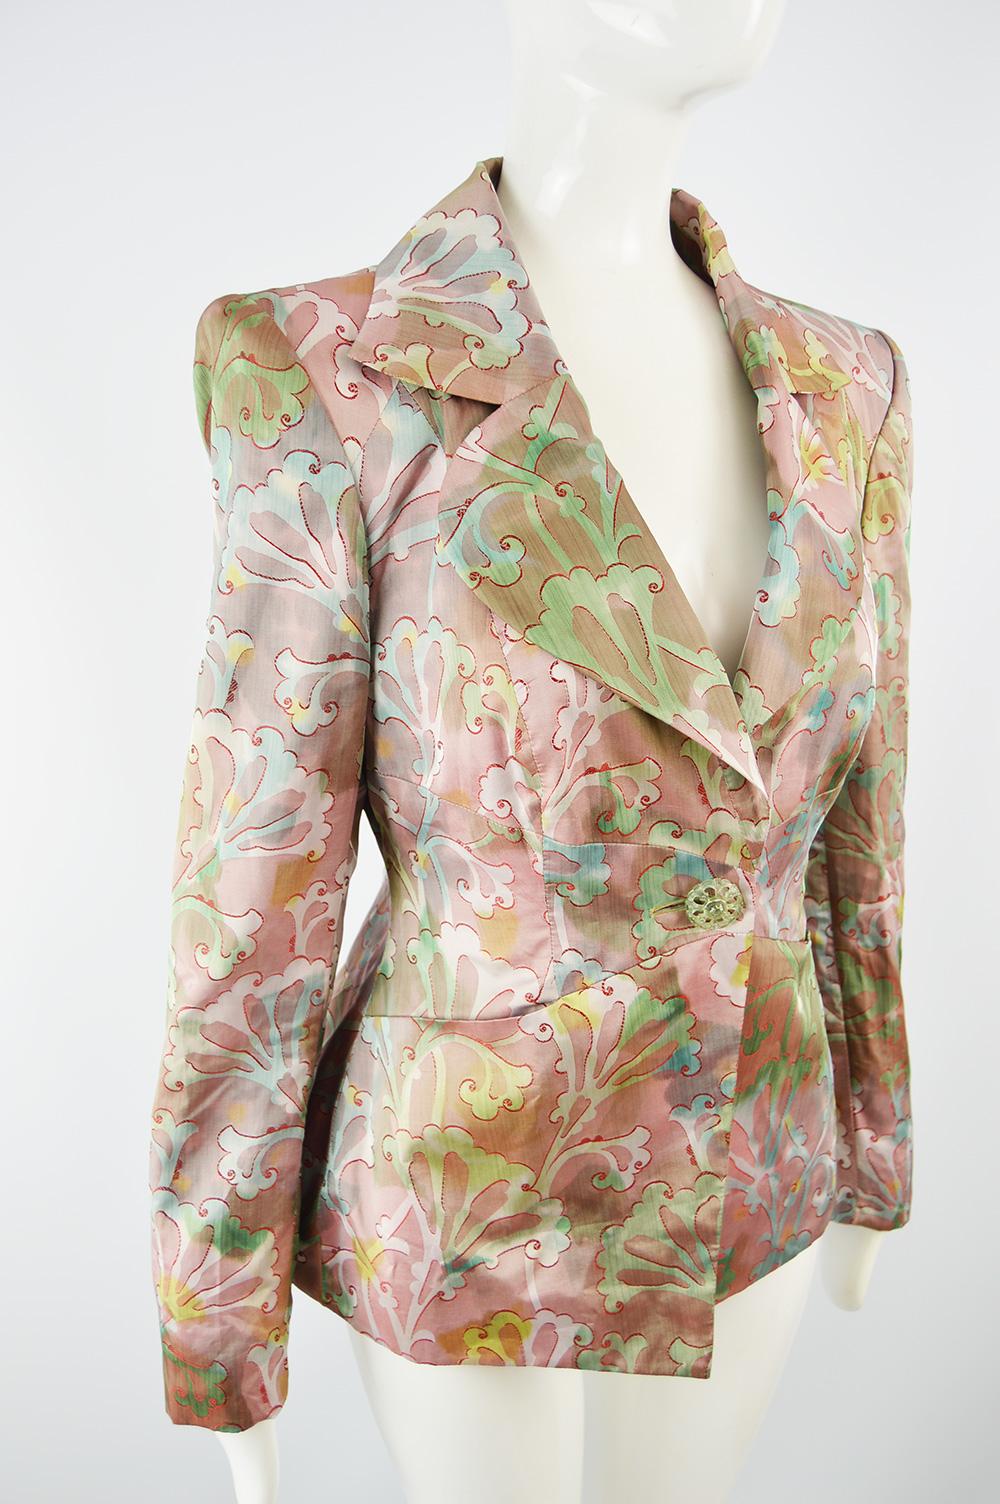 Christian Lacroix 1990s Multicolored Taffeta Tailored Evening Party Jacket In Excellent Condition For Sale In Doncaster, South Yorkshire